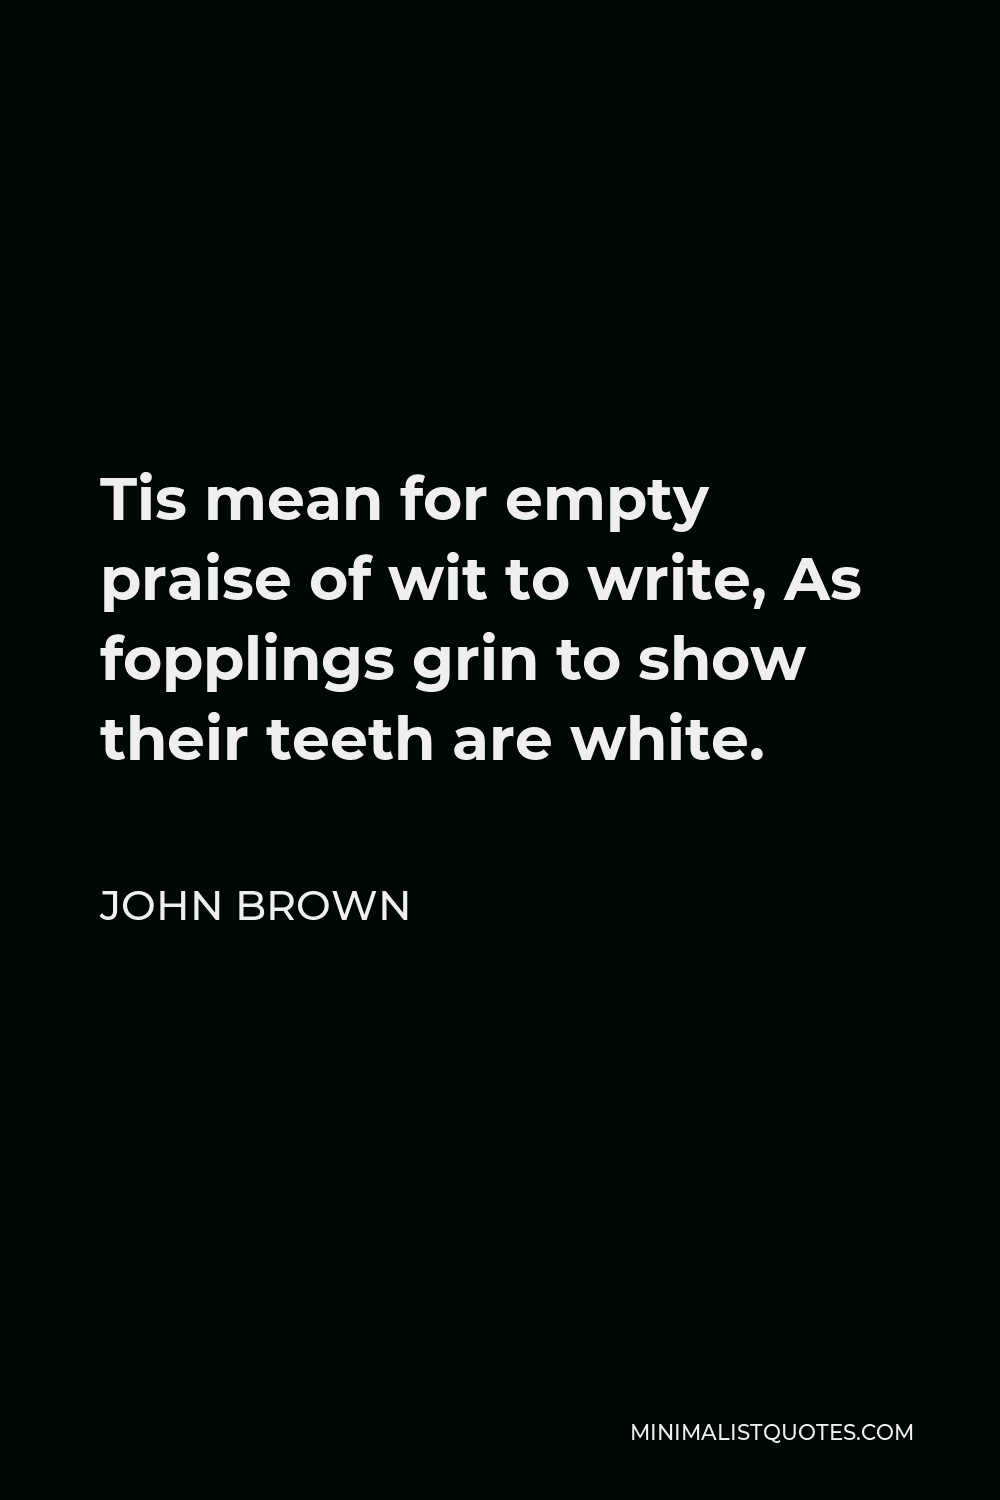 John Brown Quote - Tis mean for empty praise of wit to write, As fopplings grin to show their teeth are white.